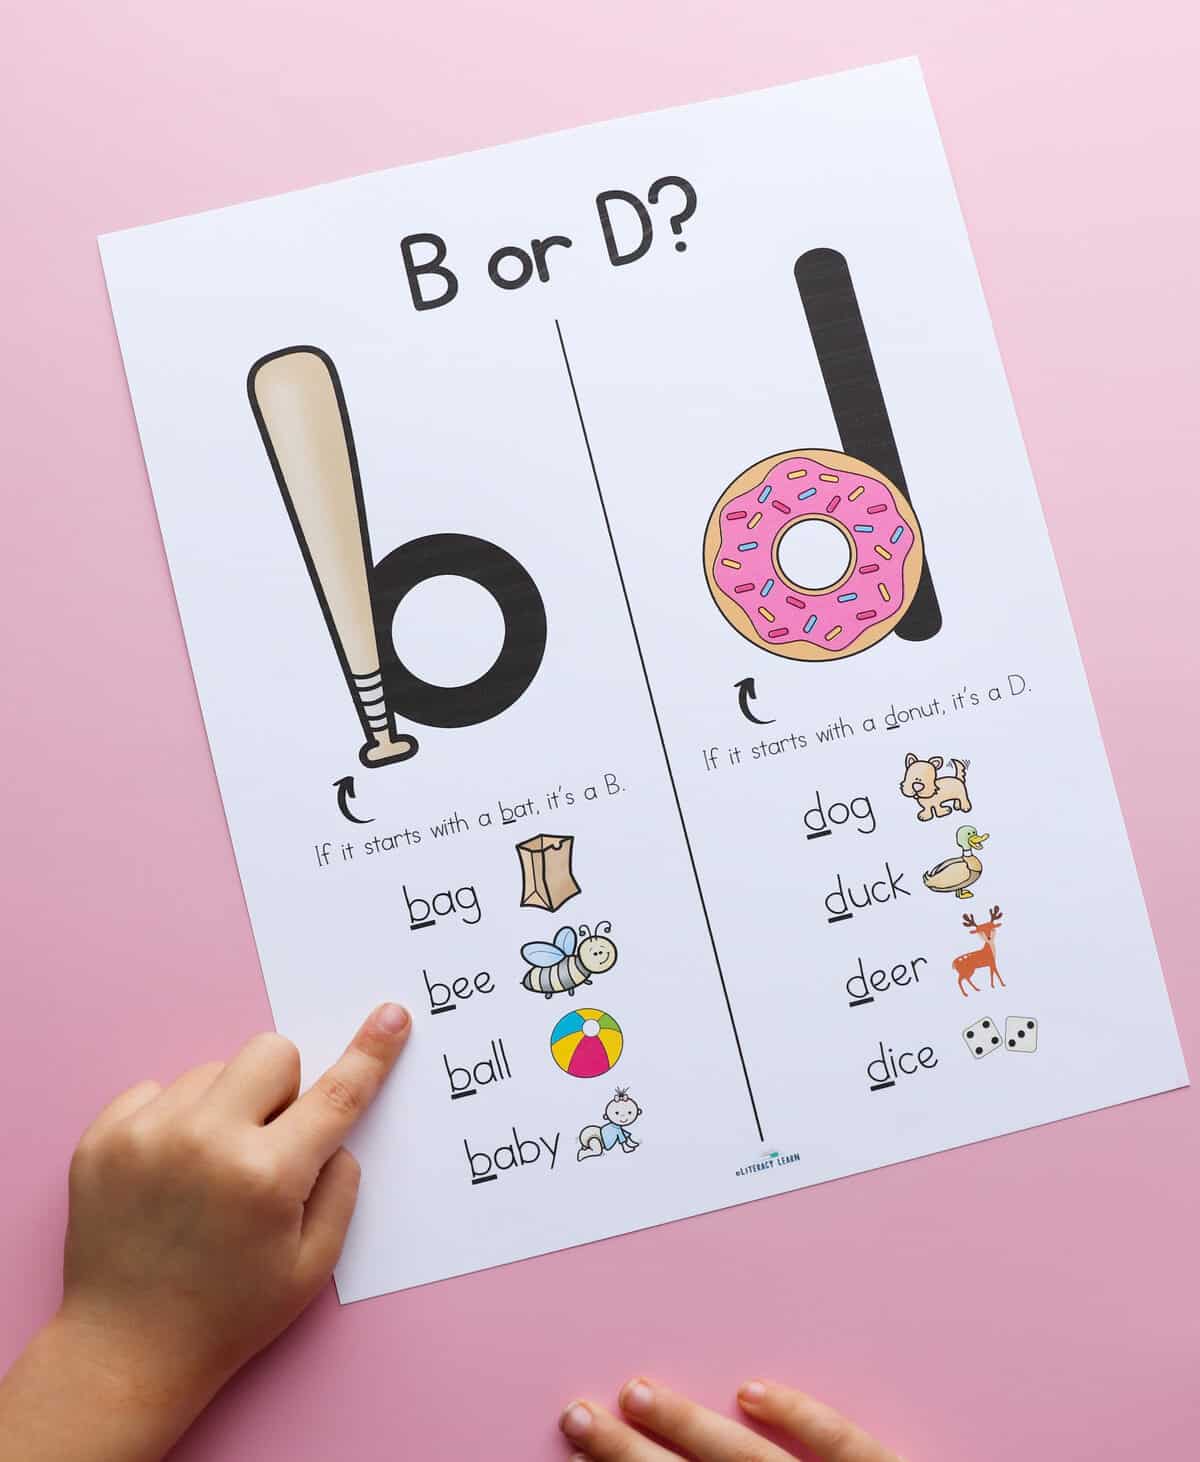 A child's hands pointing to the word list on the letter b or d reversal poster.